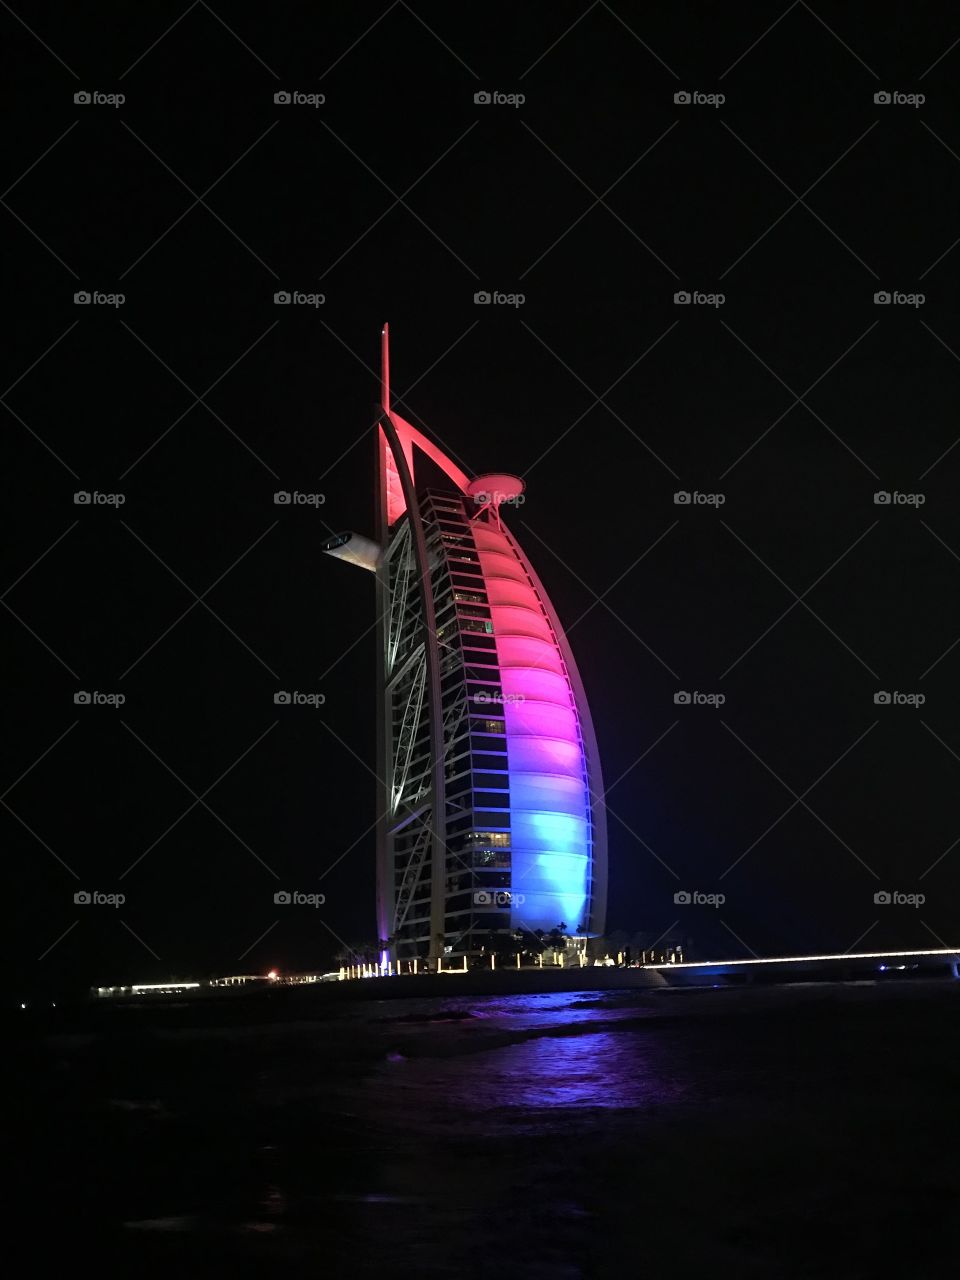 The Burj AlArab In all of its glory captured from our amazing experience in Dubai earlier this year!